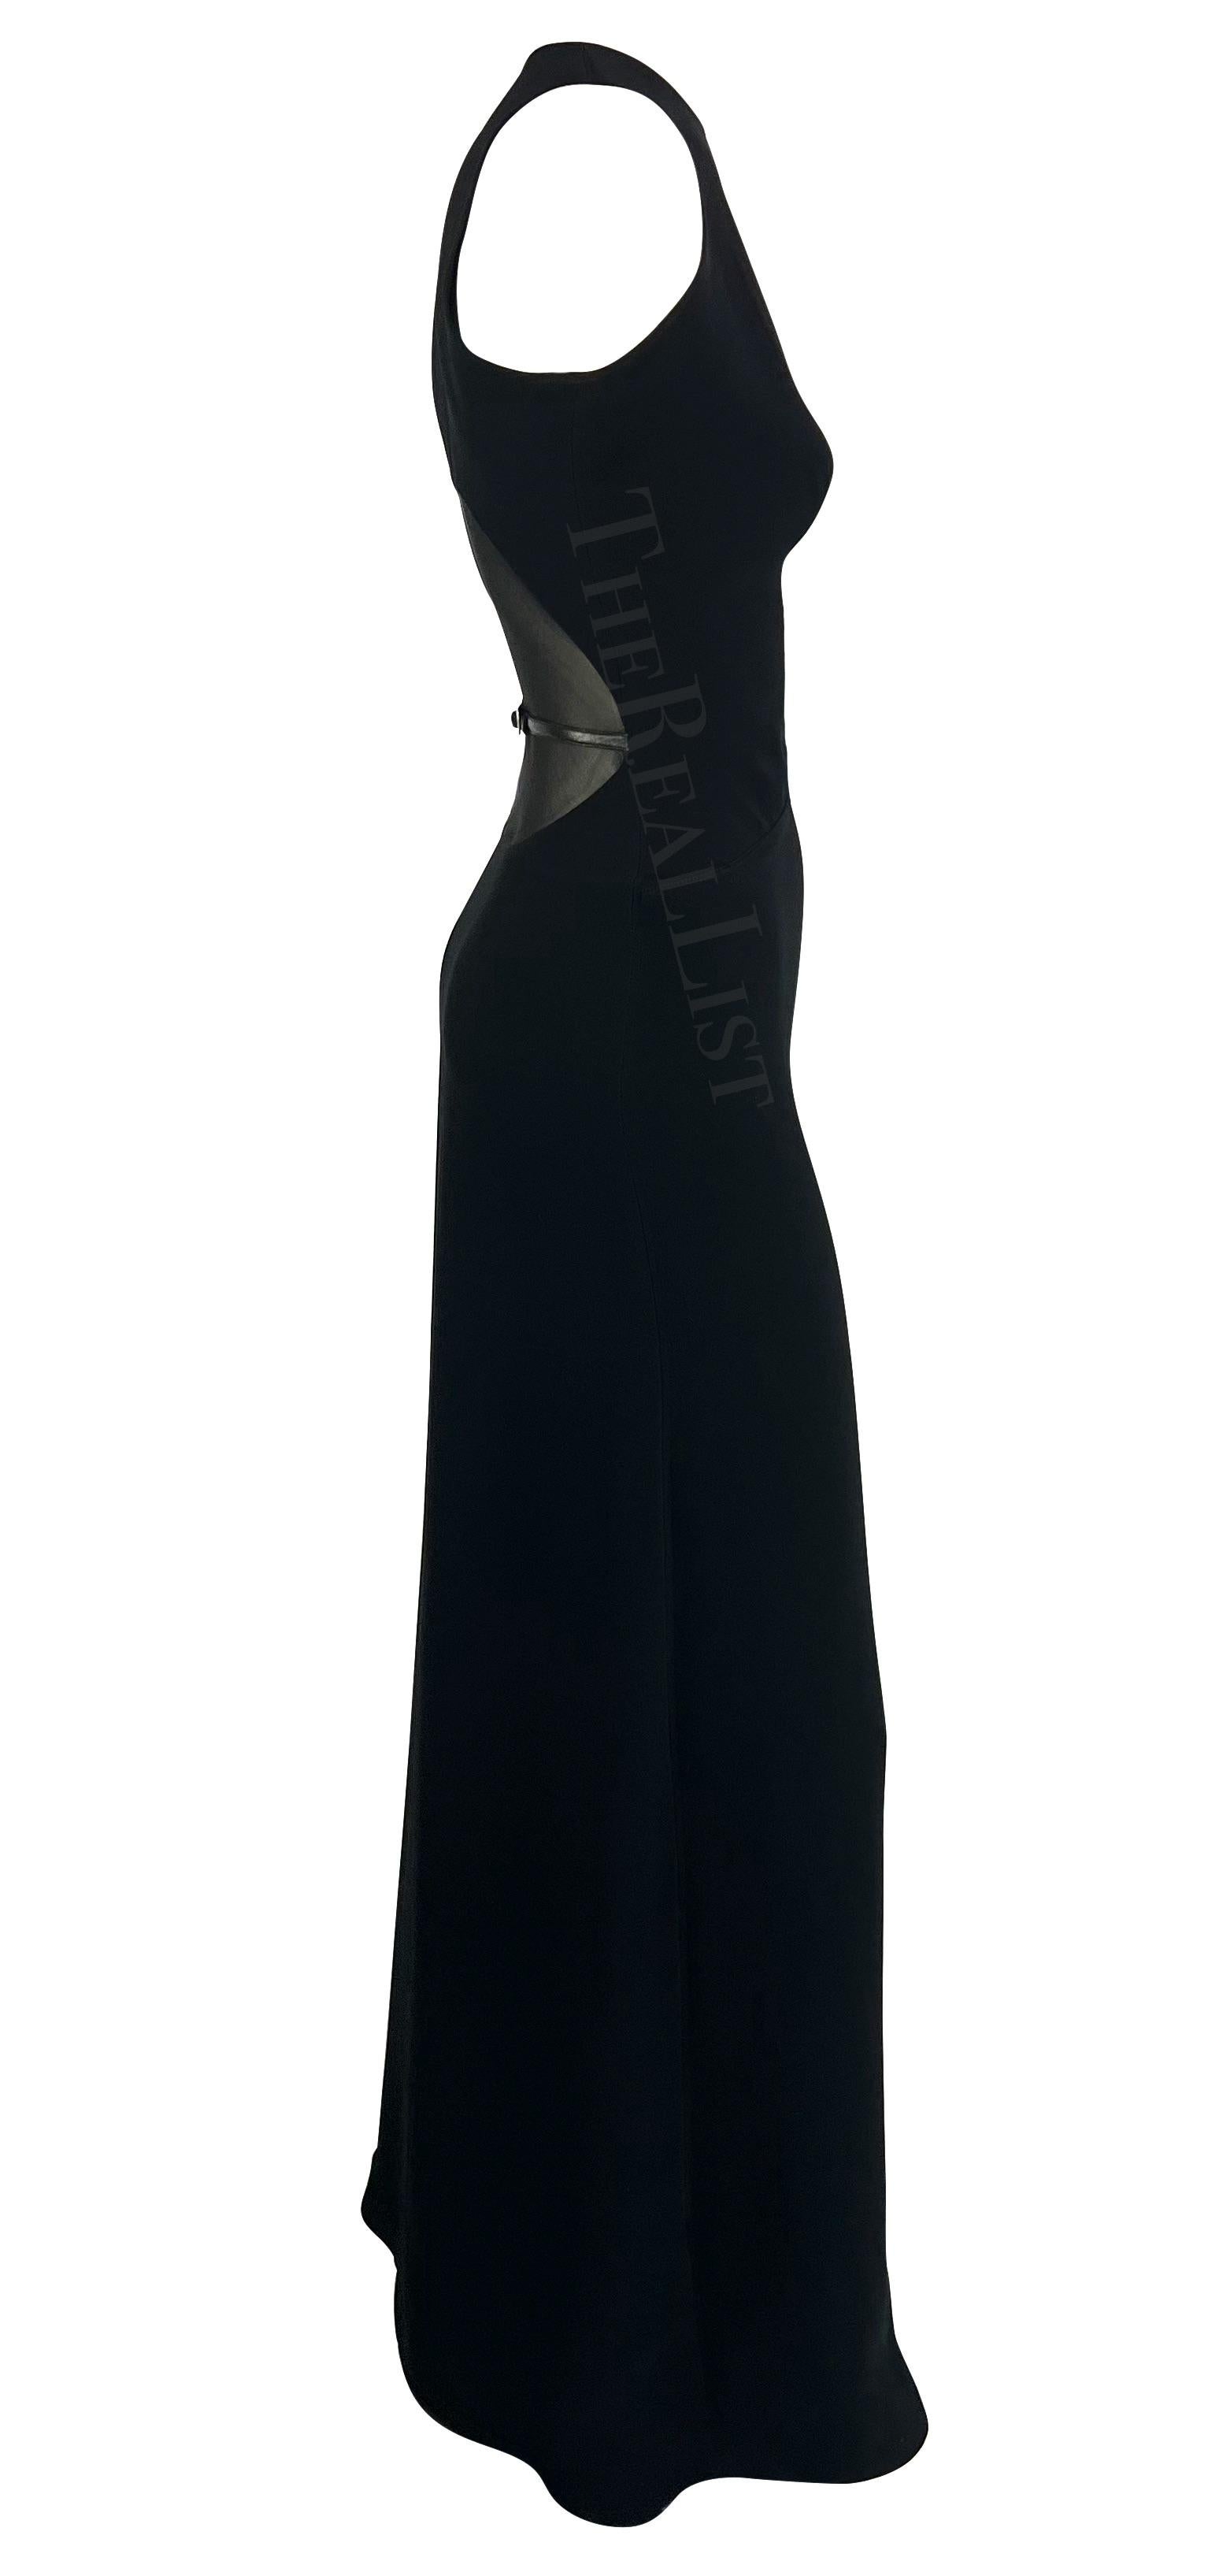 Presenting a fabulous black sleeveless gown designed for Paco Rabanne’s Fall/Winter 2001 runway collection. This elegant form-fitting dress features a high neckline and a sheer mesh-covered cutout at the back accented with a small adjustable leather